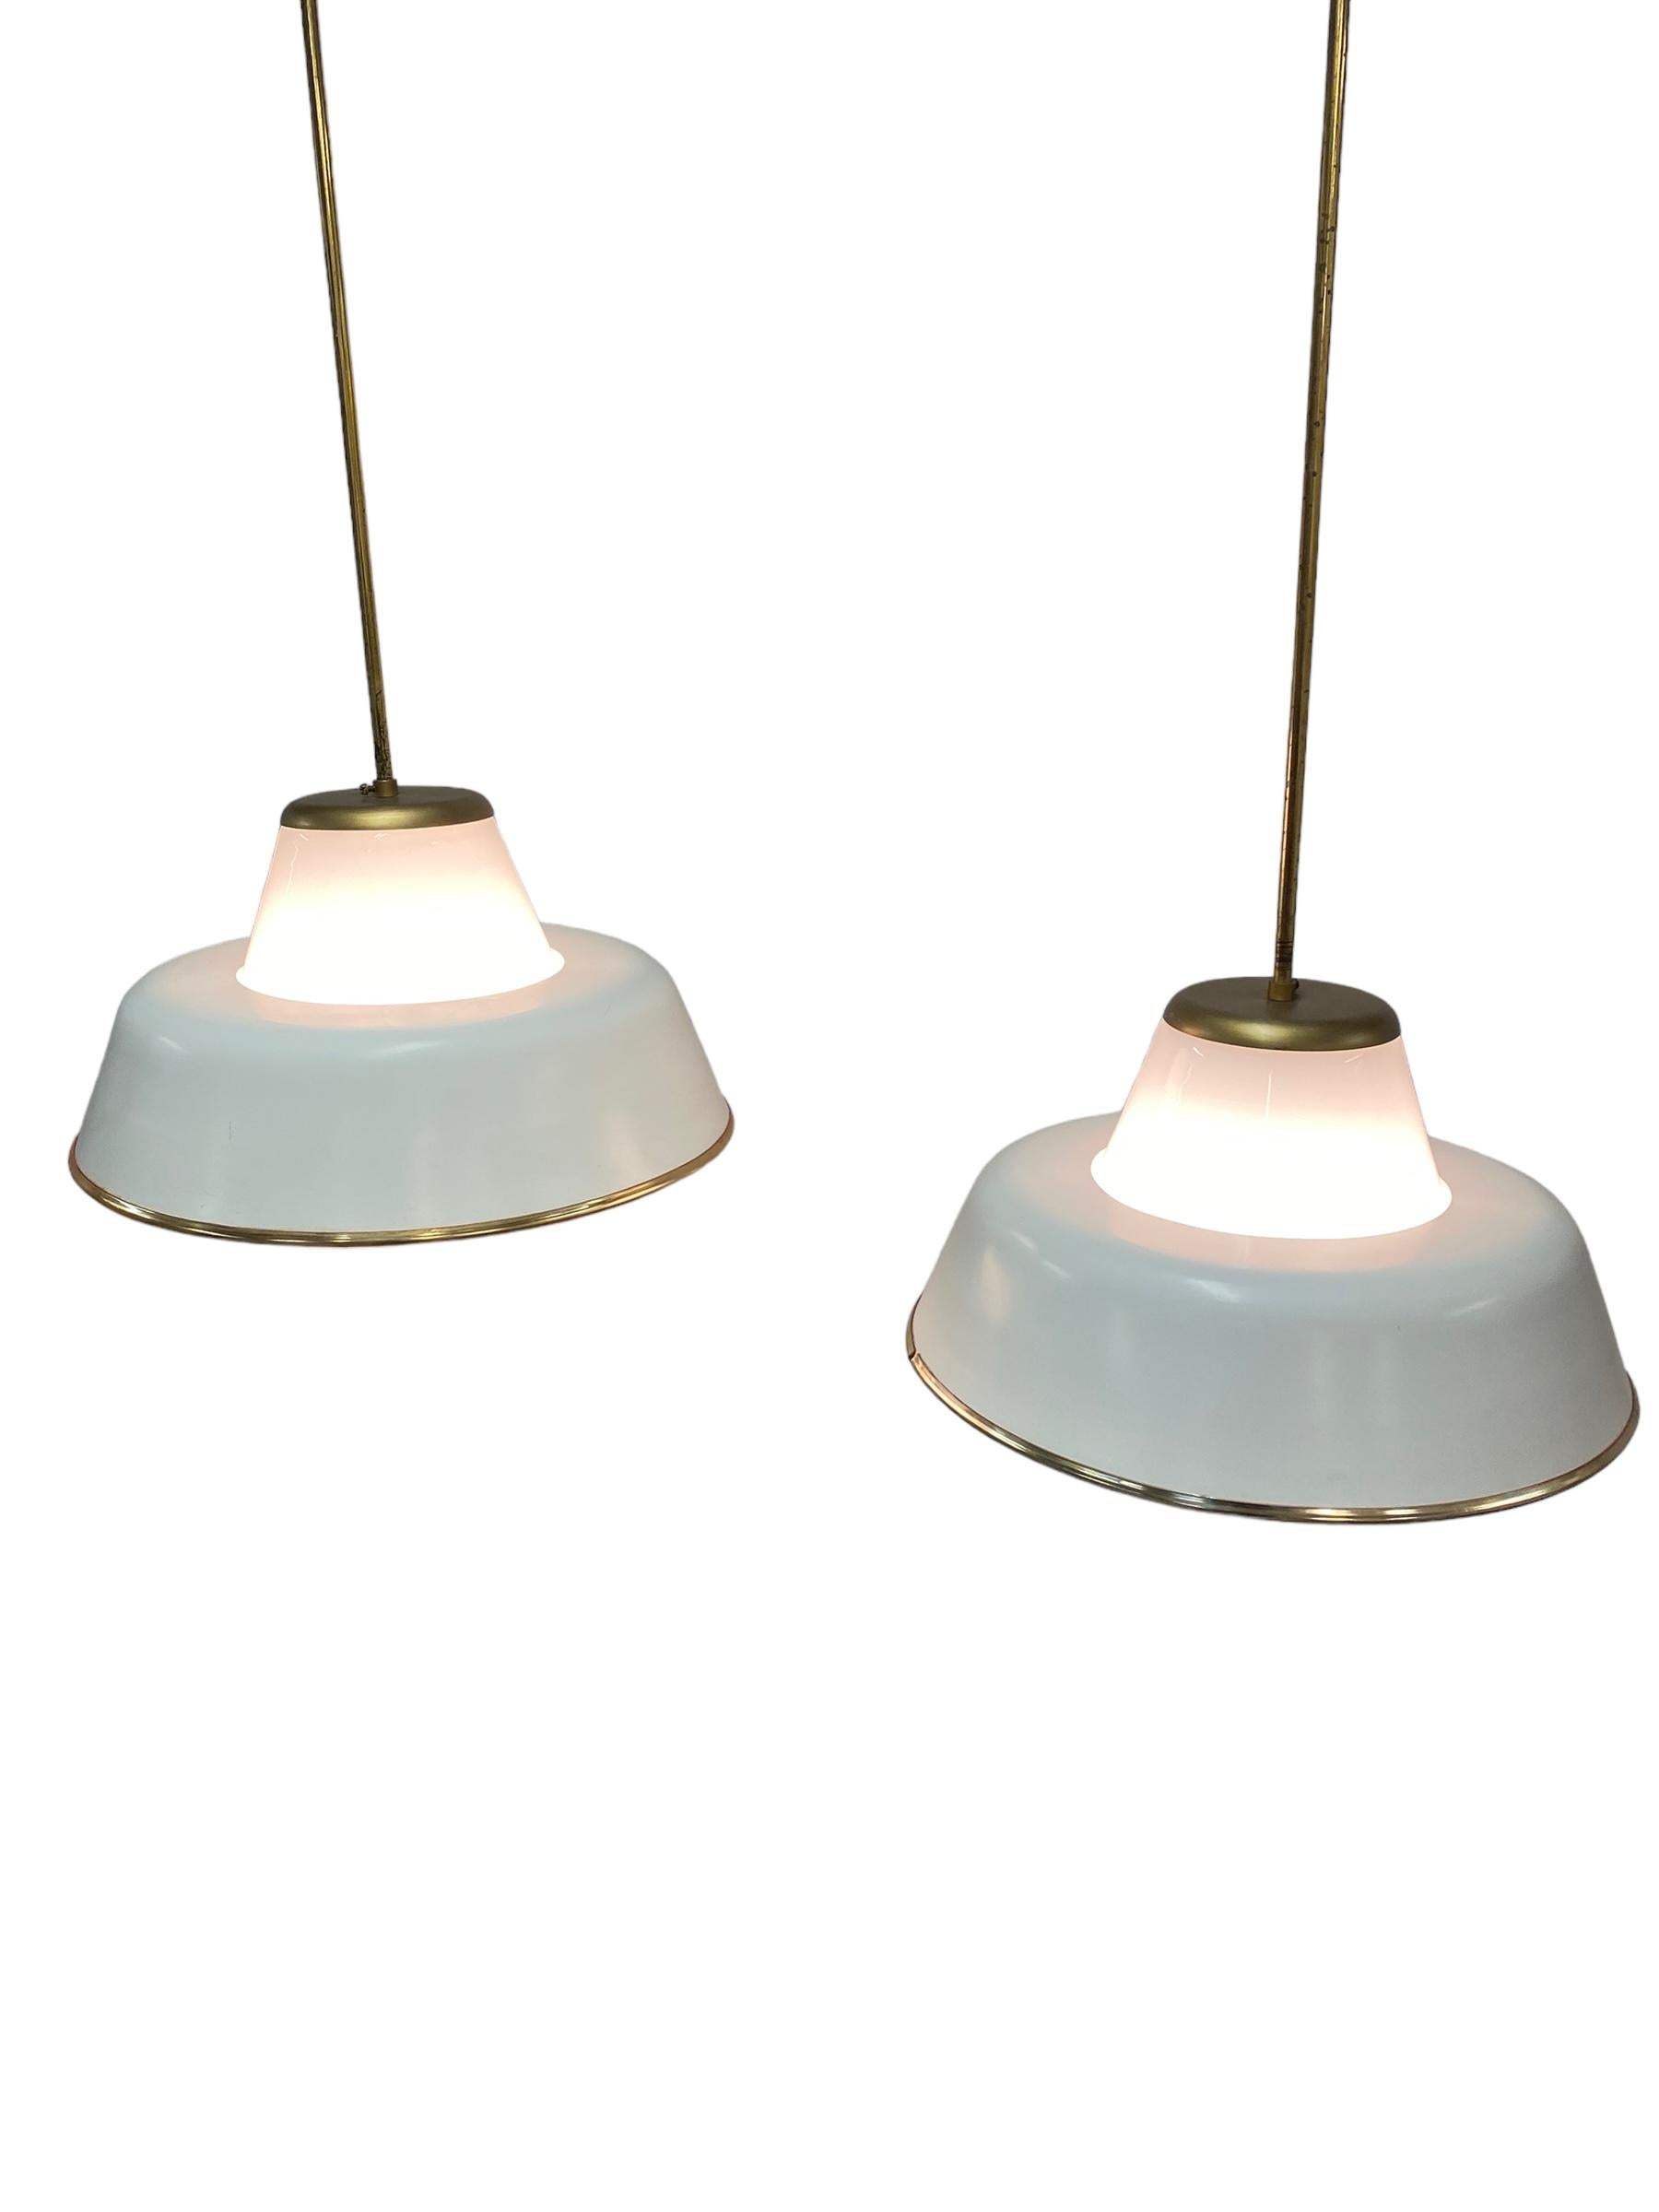 Pair Of Lisa Johansson-Papé Ceiling Pendants Model. 61-347, Orno 1950s In Good Condition For Sale In Helsinki, FI